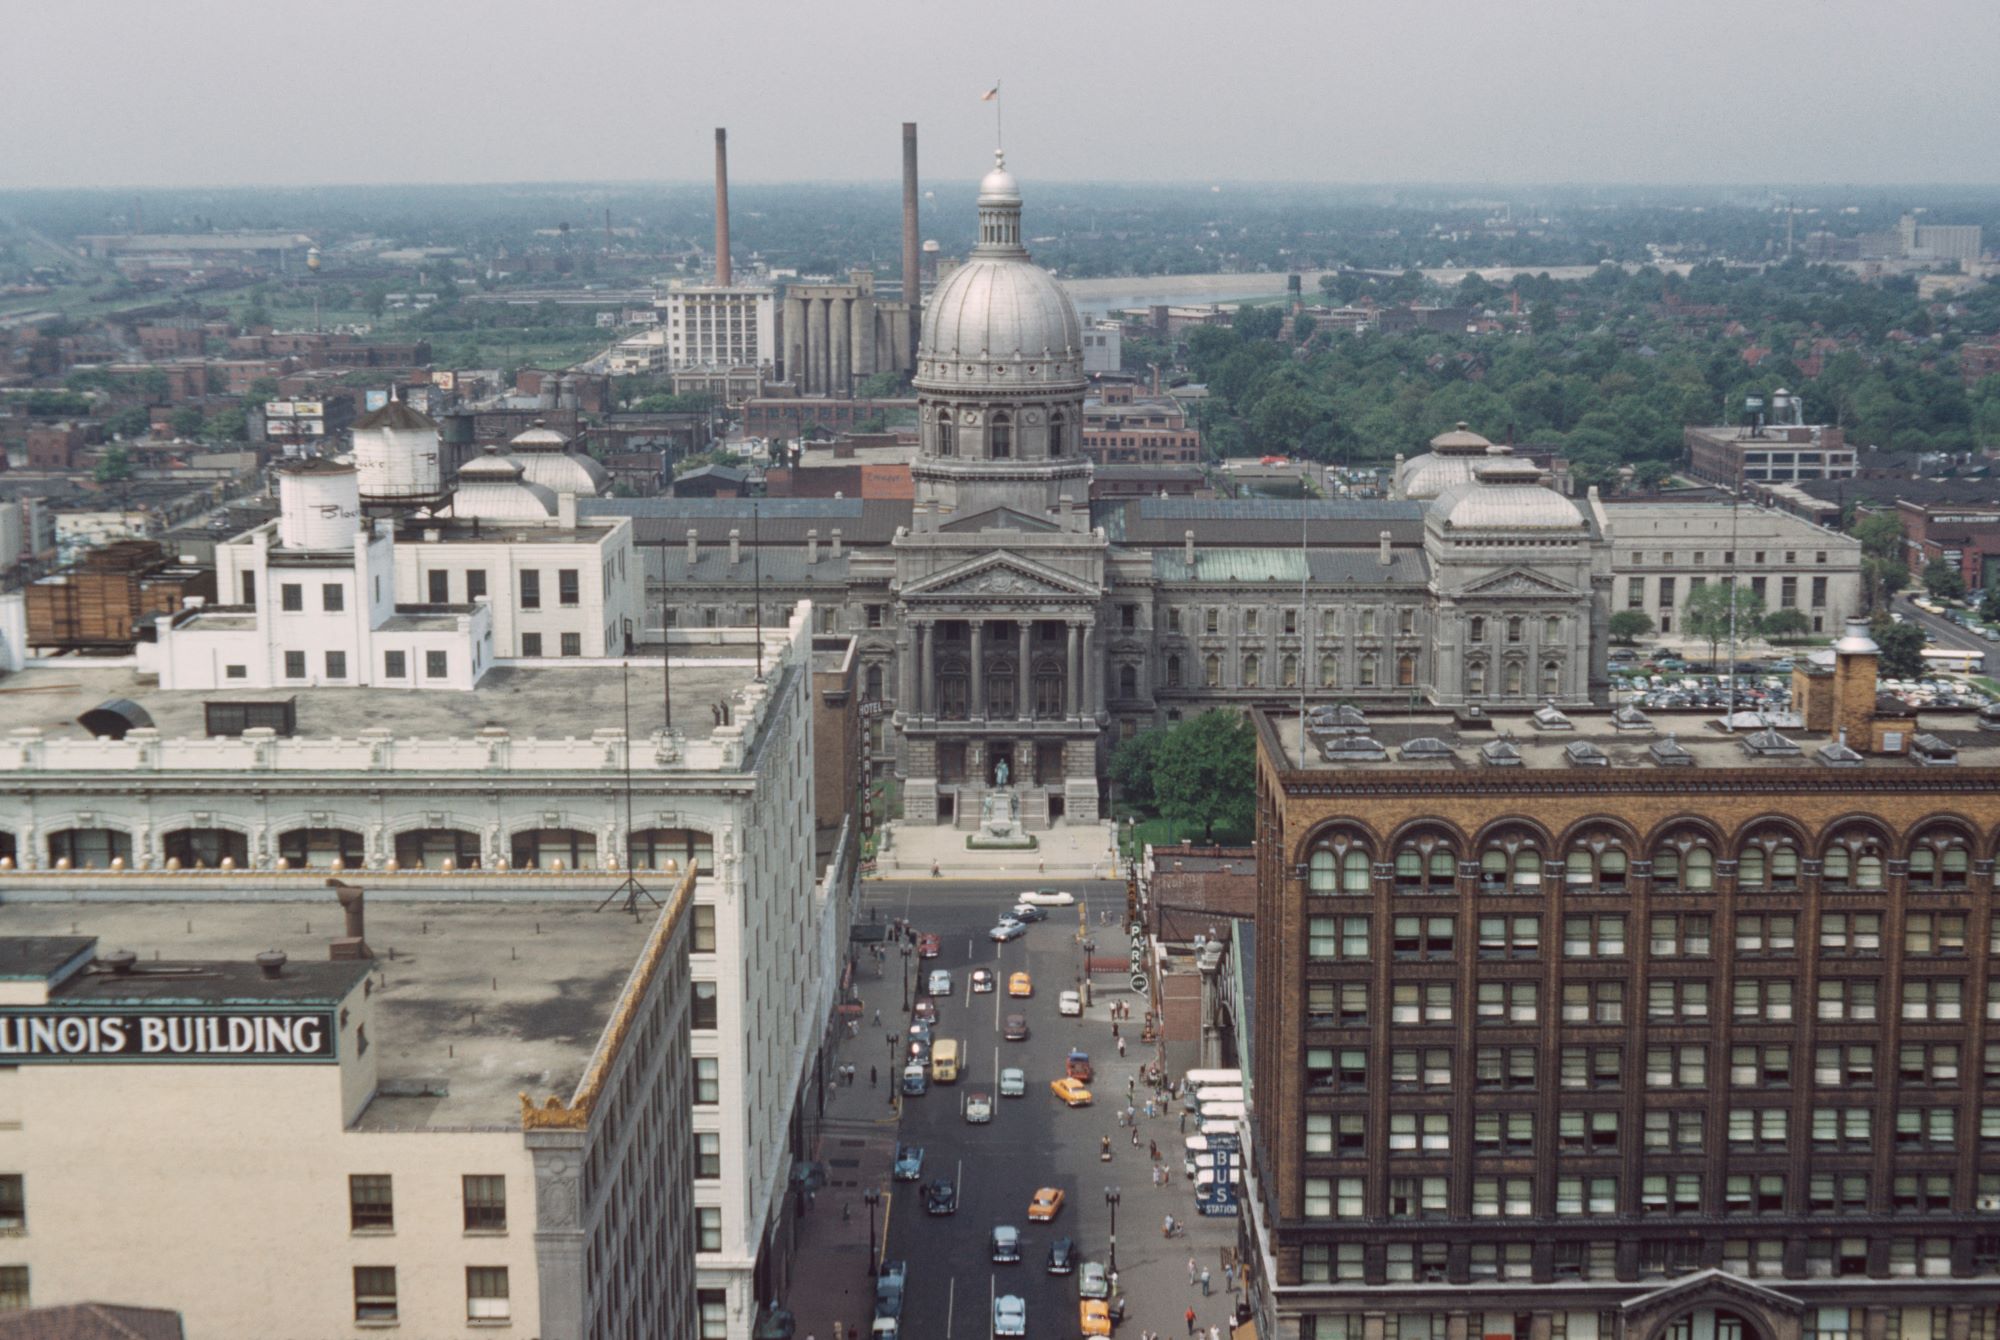 A picture of Indiana's State building and highways.